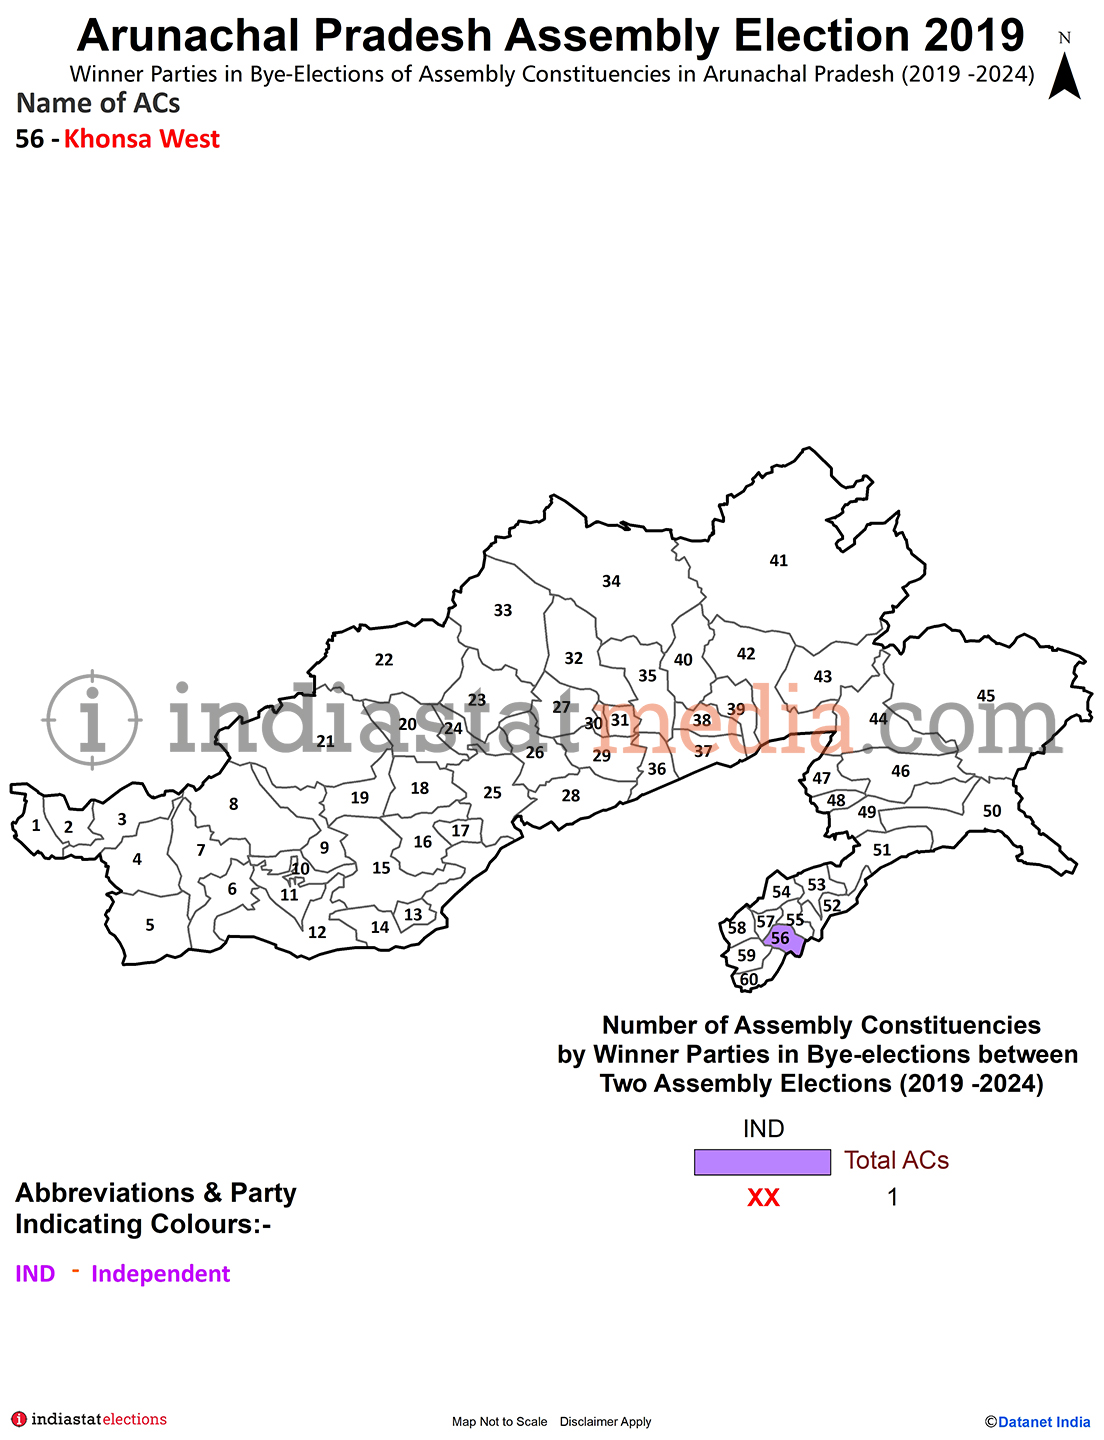 Winner Parties in Bye-elections between Two Assembly Elections in Arunachal Pradesh (2019 & 2024)